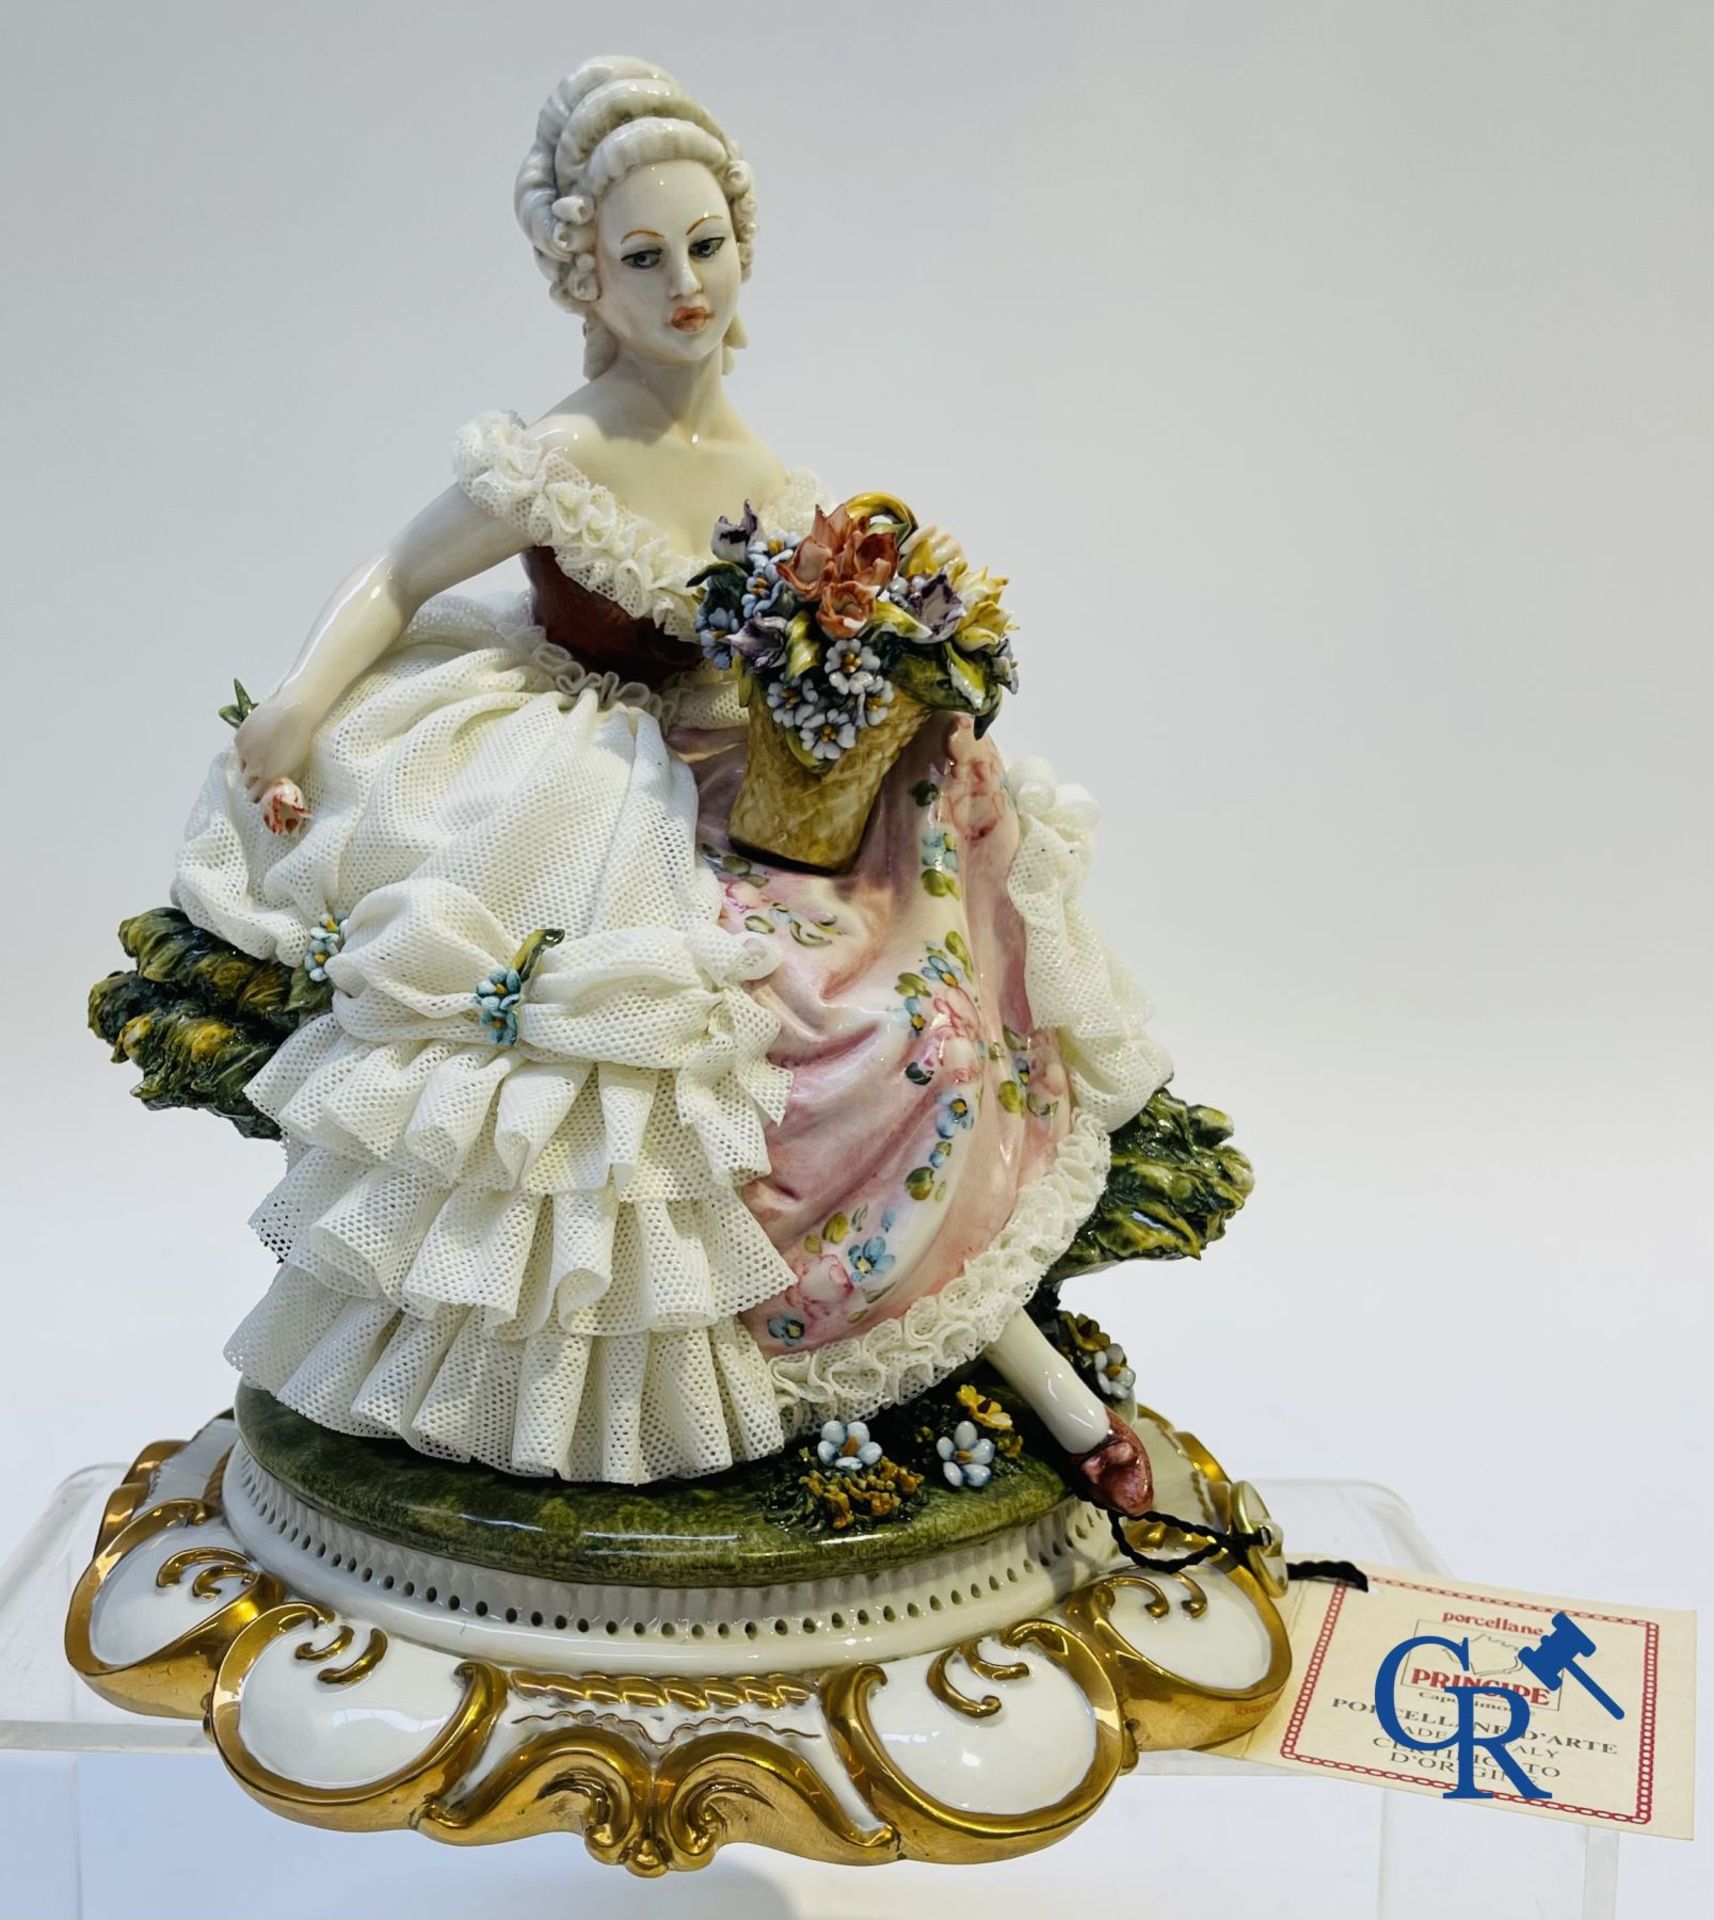 Porcelain: Capodimonte: 3 groups in Italian porcelain with lace. - Image 10 of 12